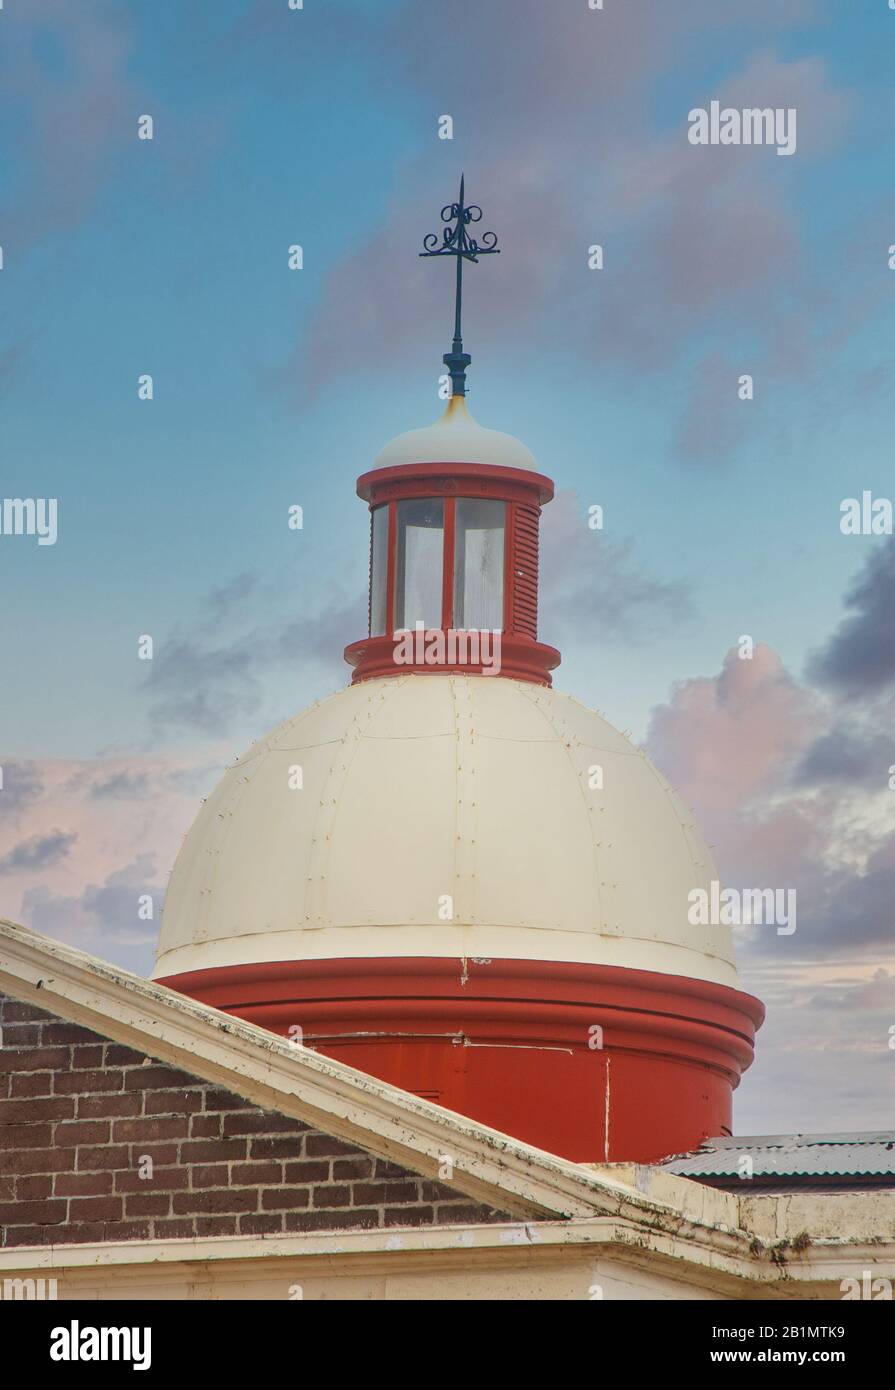 Red and Brown Dome on Building Stock Photo